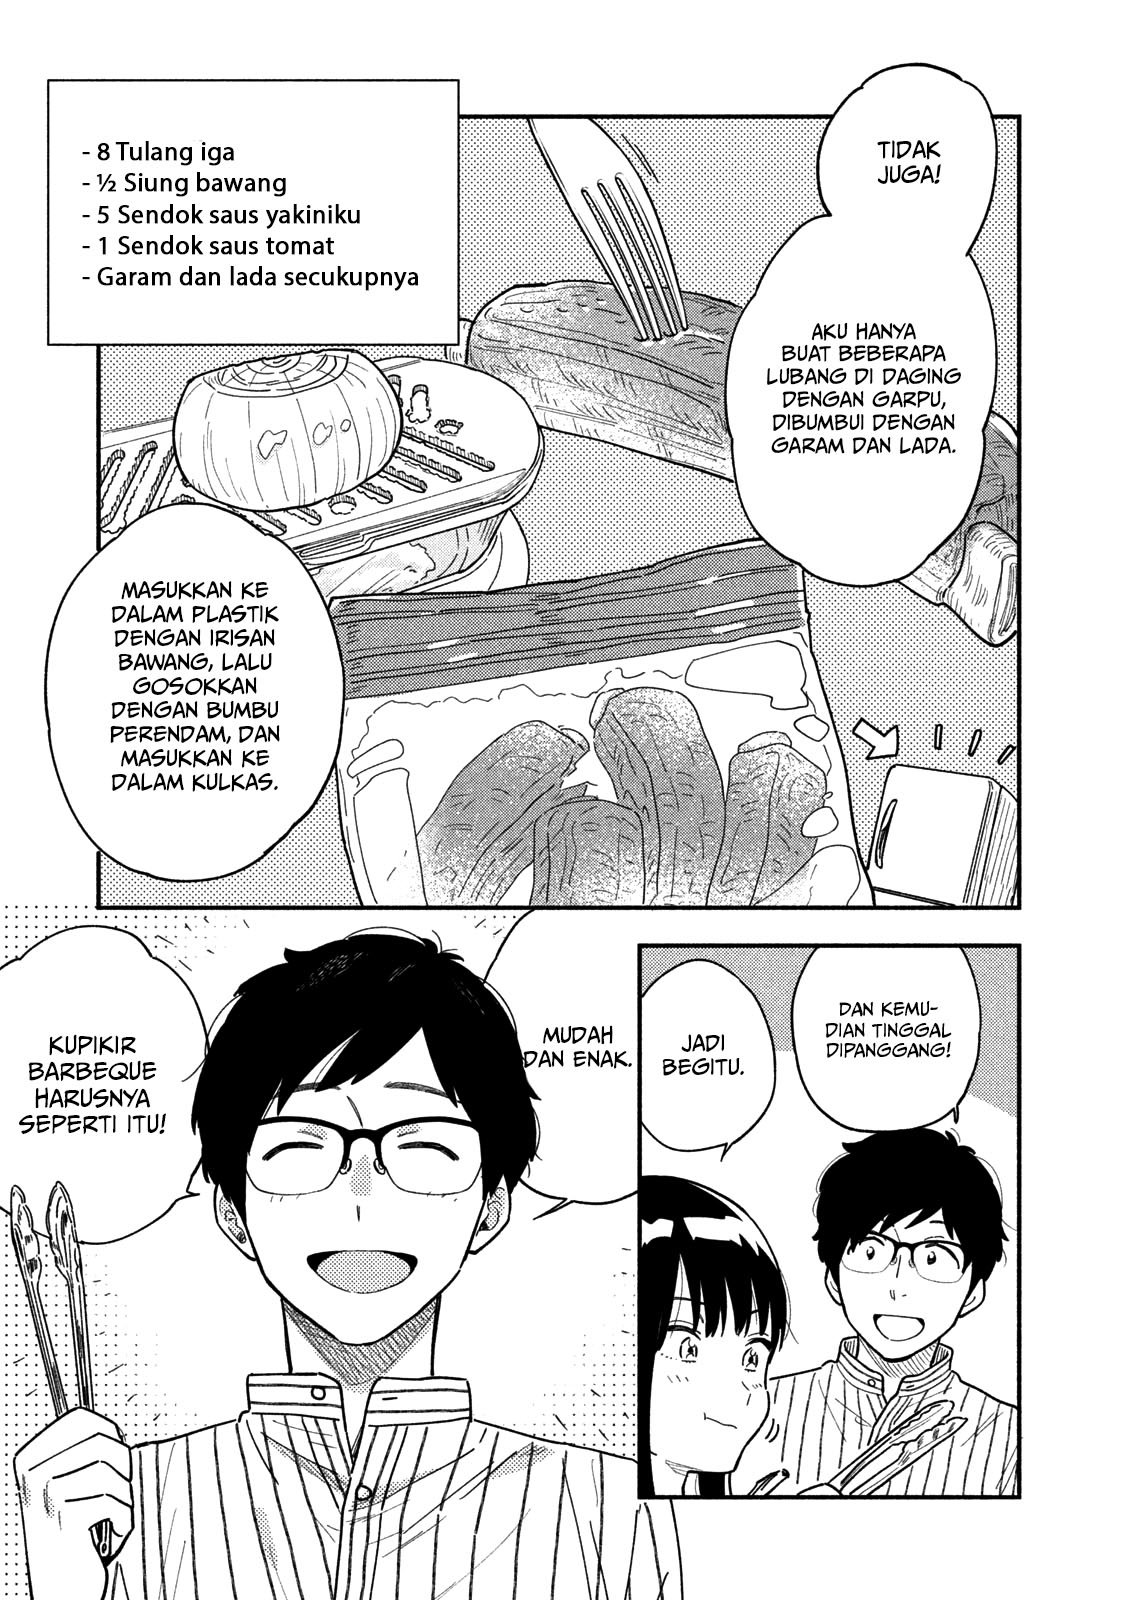 A Rare Marriage: How to Grill Our Love Chapter 01